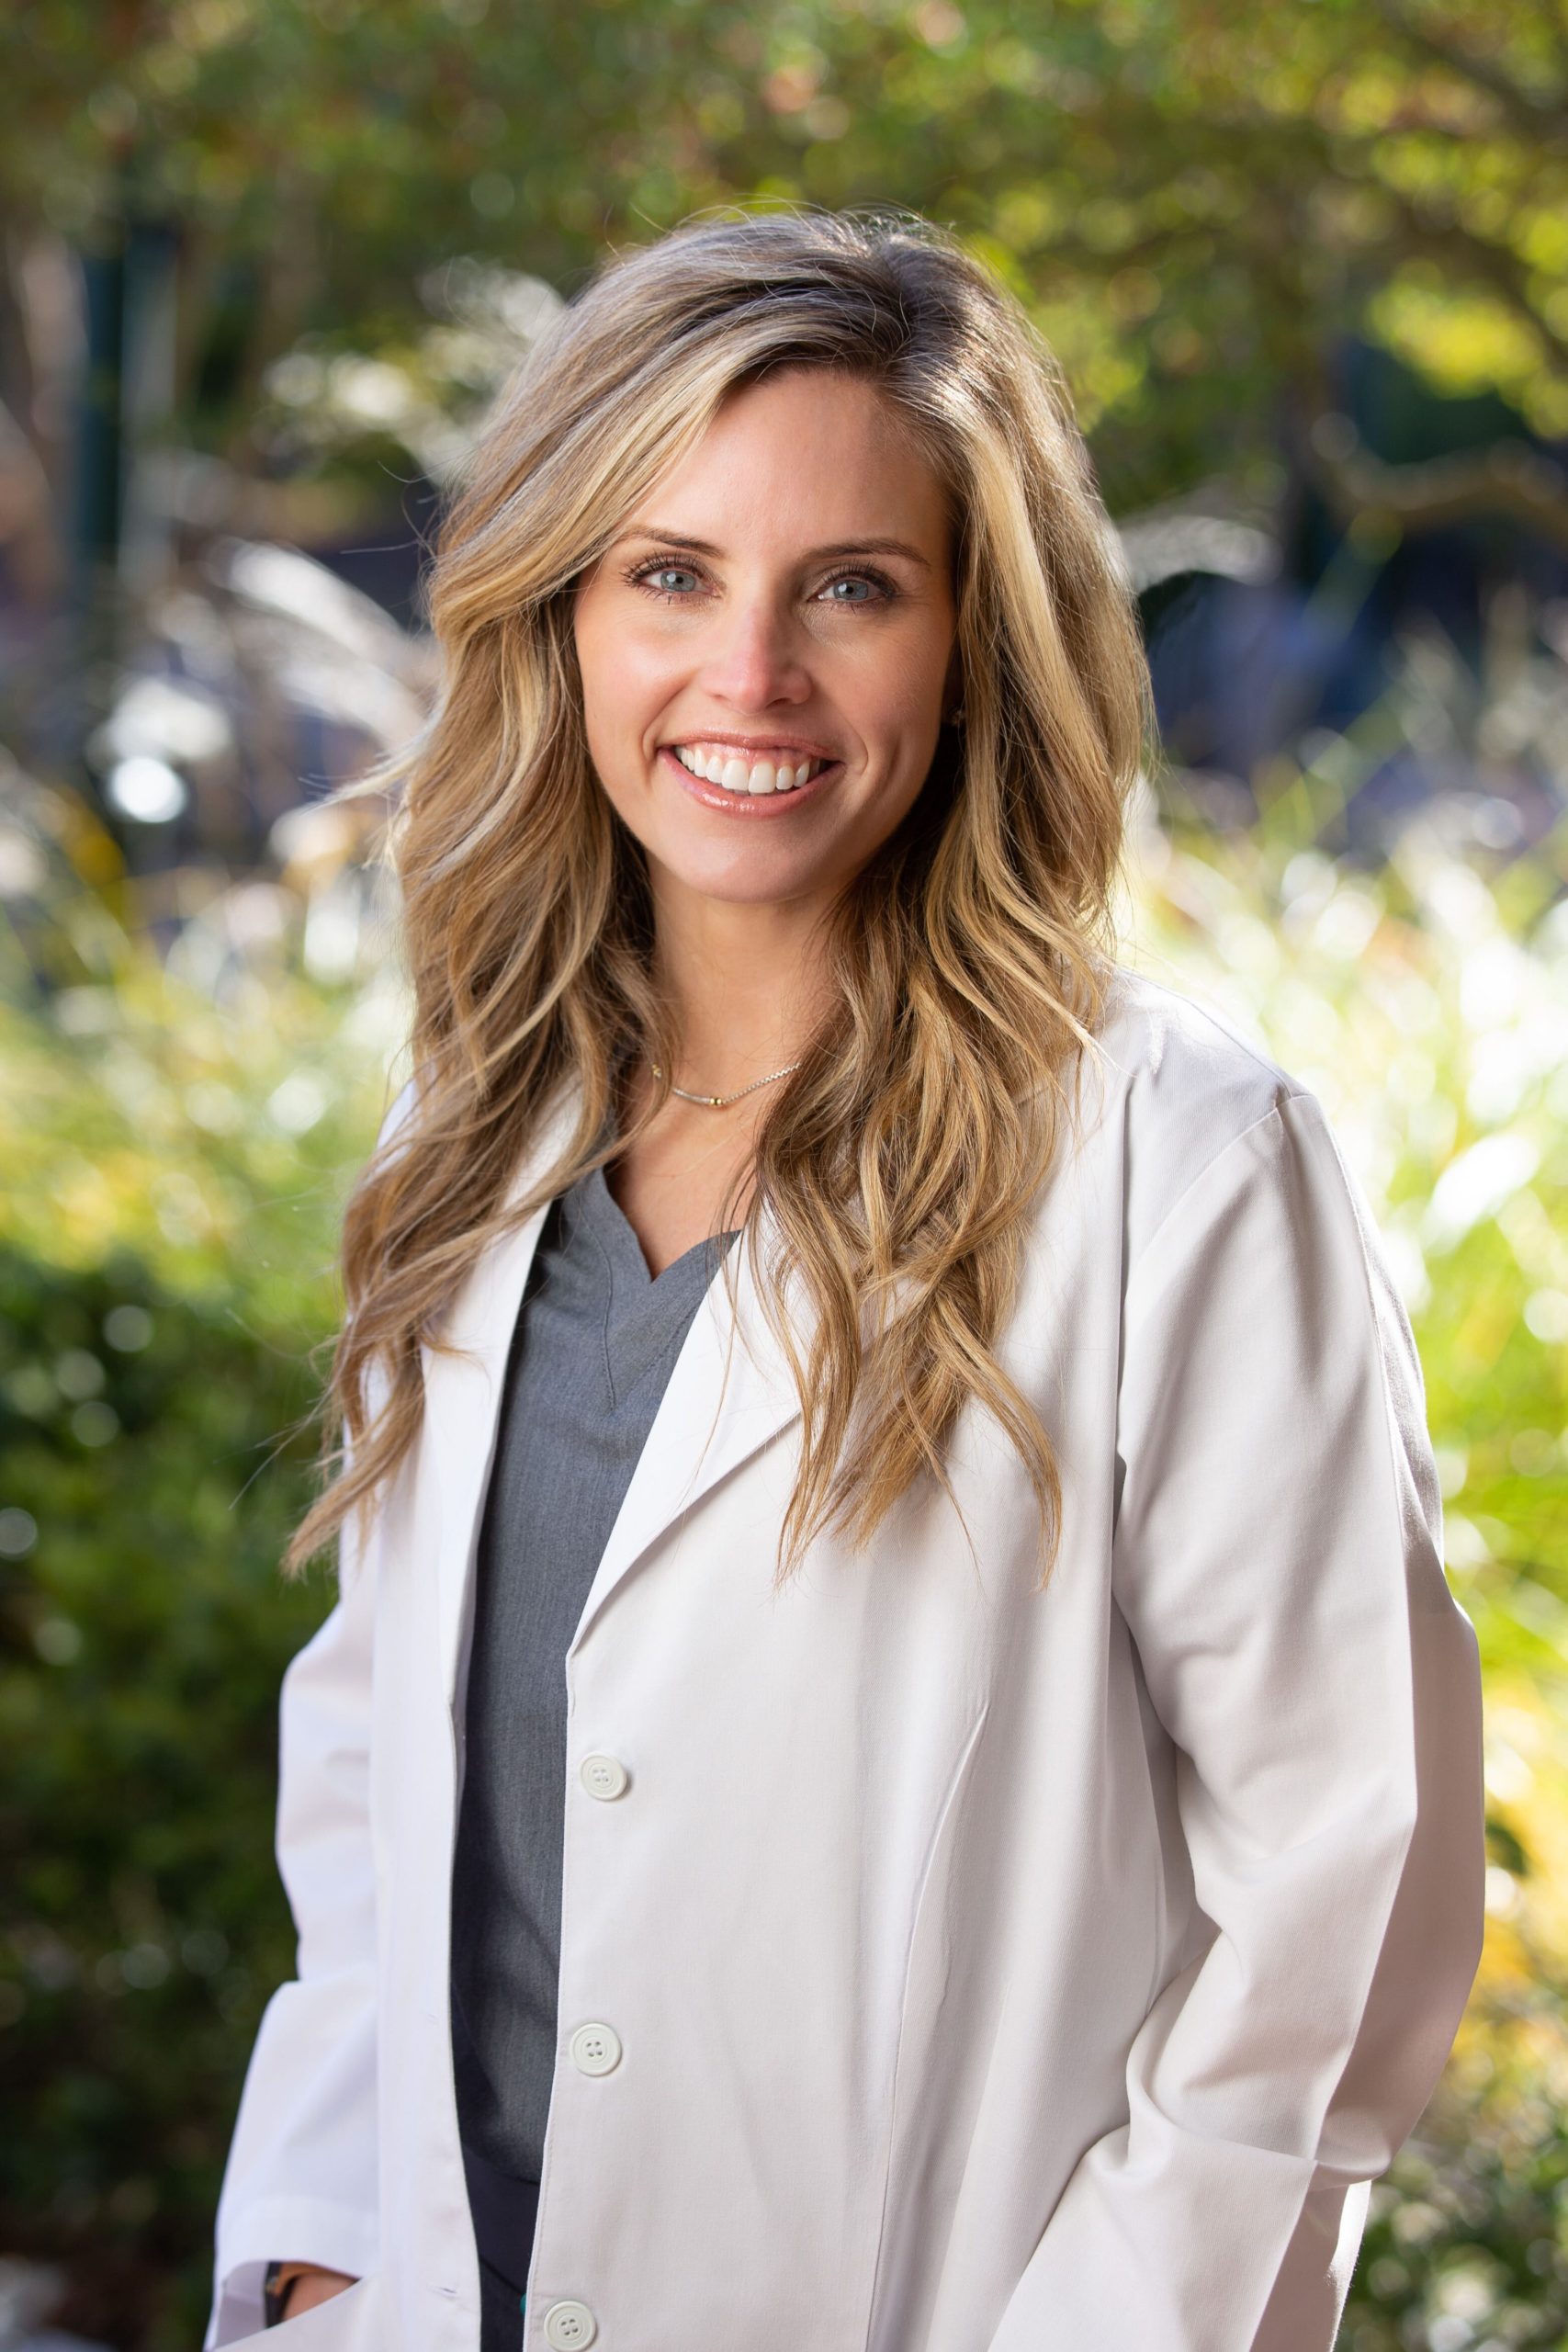 <h3>Abby Hall</h3>
<h5>Licensed RN, BSN, MSN, CRNA</h5>
<p>Abby was an ER/trauma and ICU nurse and has administered anesthesia in general surgery, plastics, obstetrics, and pediatrics throughout her career as a CRNA. While continuing to provide anesthesia services, she joins our team to put her attention to detail and highly unique skill set to work performing aesthetic procedures. </p>